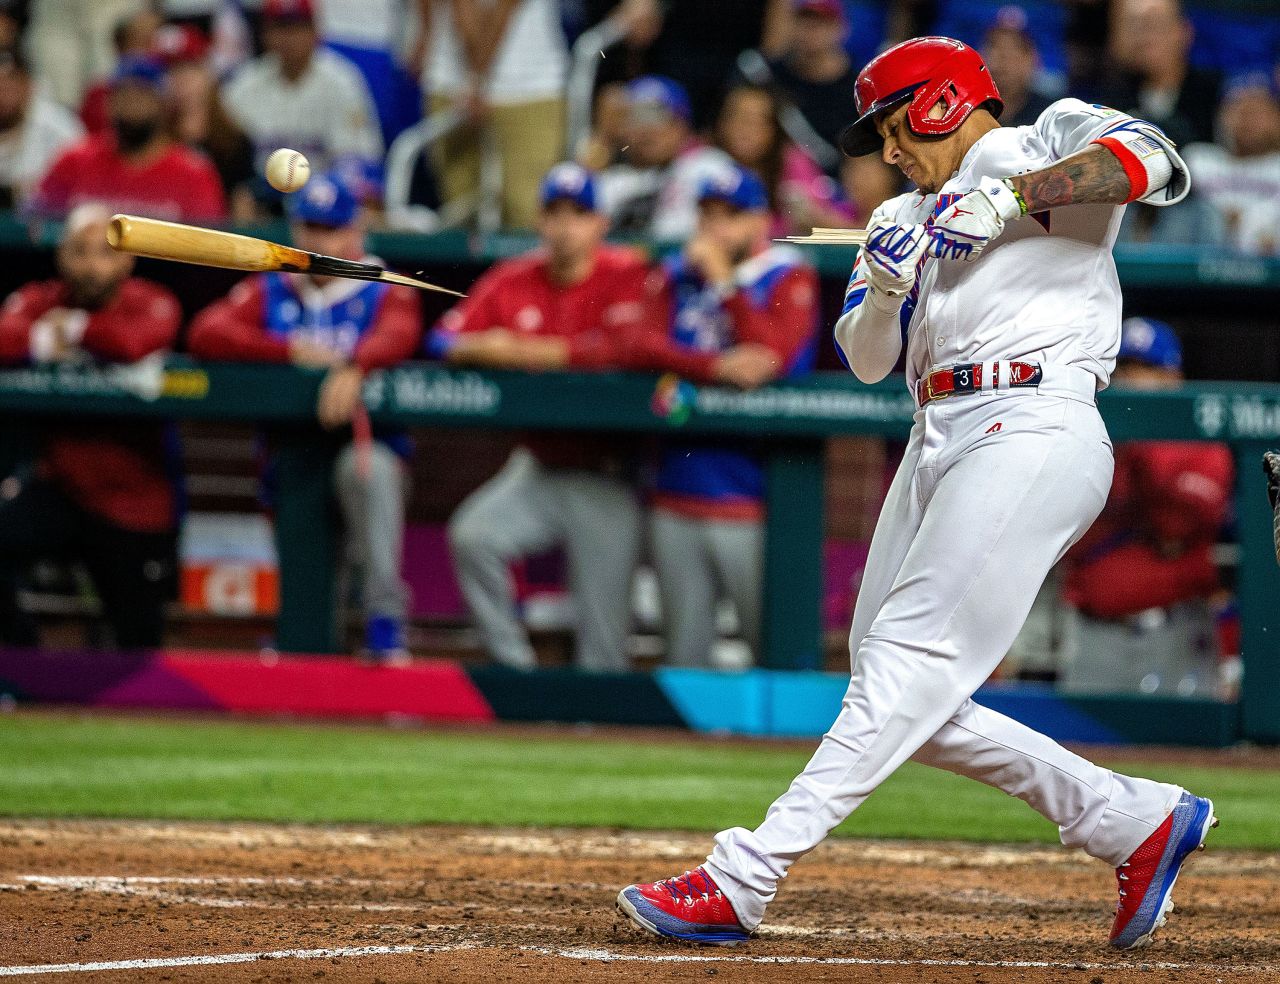 Third baseman Manny Machado of the Dominican Republic breaks his bat during a World Baseball Classic game against Puerto Rico in Miami on Wednesday, March 15.